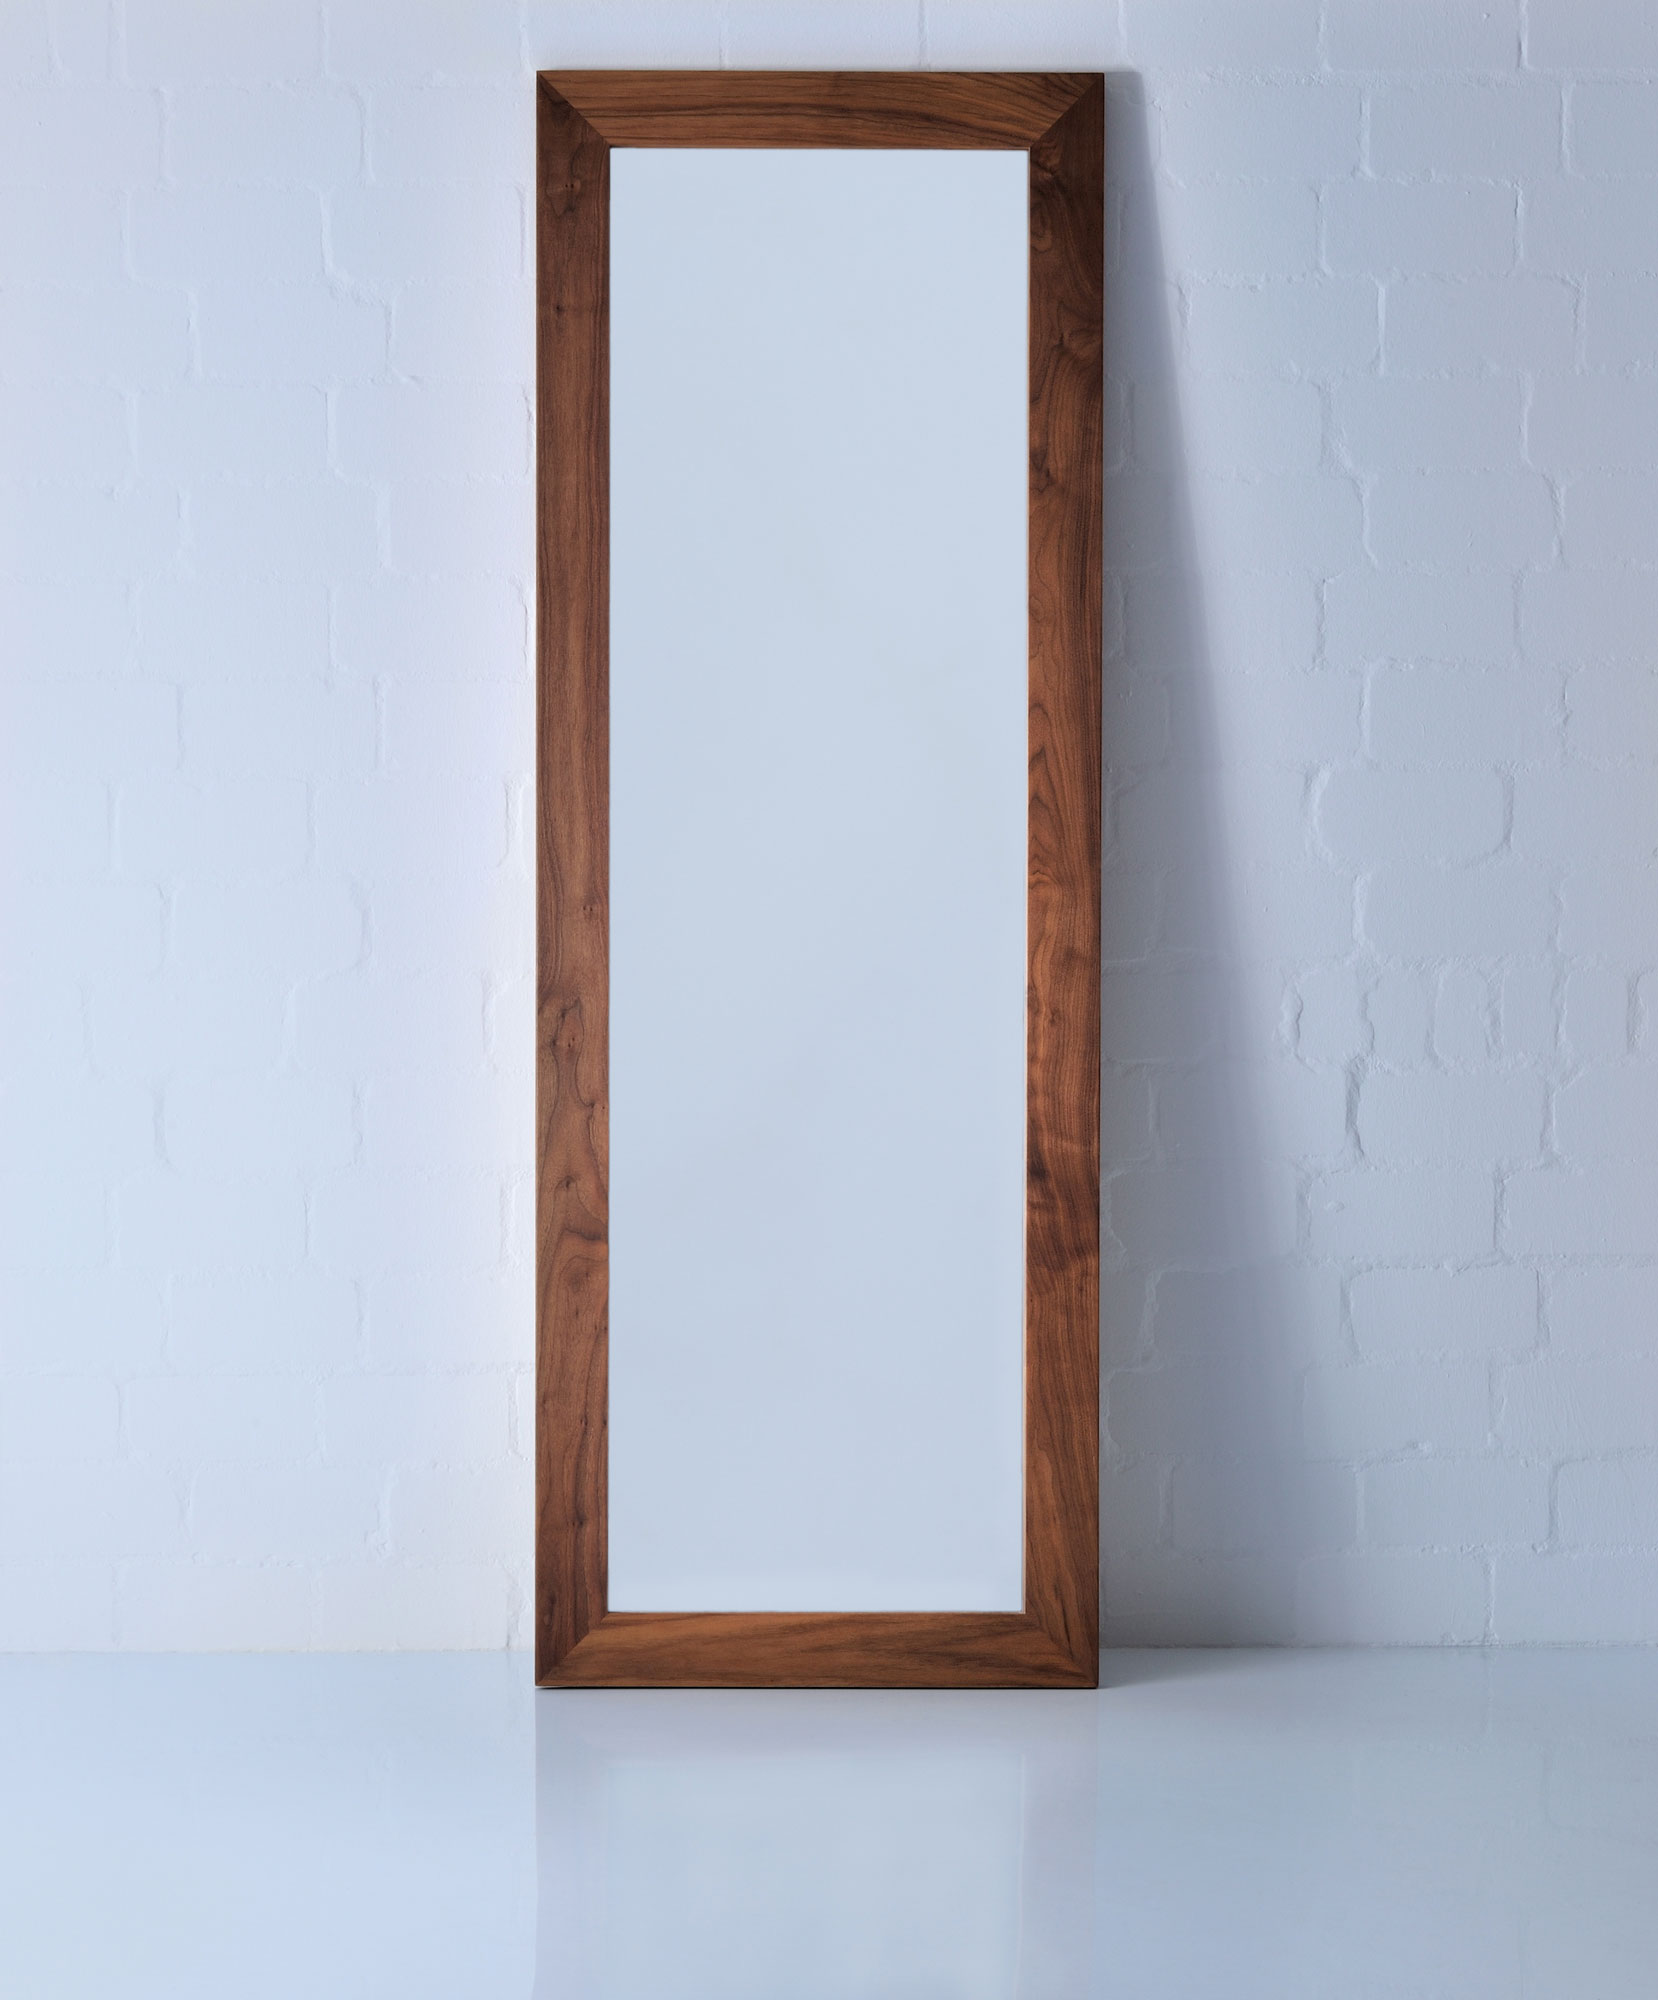 Solid Wood Mirror Accessory MIRROR nef0448 custom made in solid wood by vitamin design